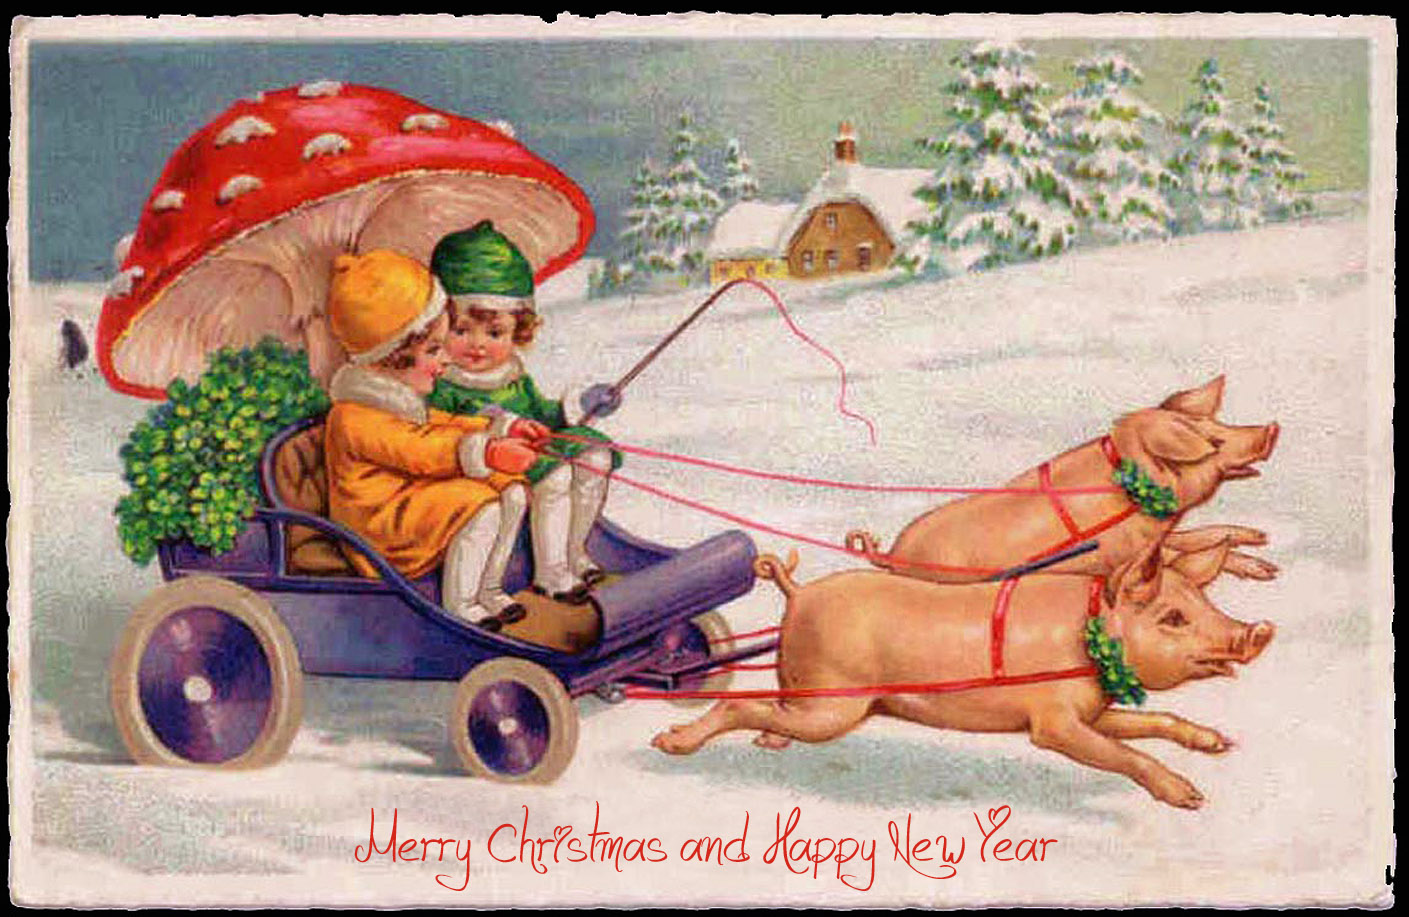 Kids using a huge mushroom as umbrella ride a small carriage pulled by pigs - funny Christmas and New Year card